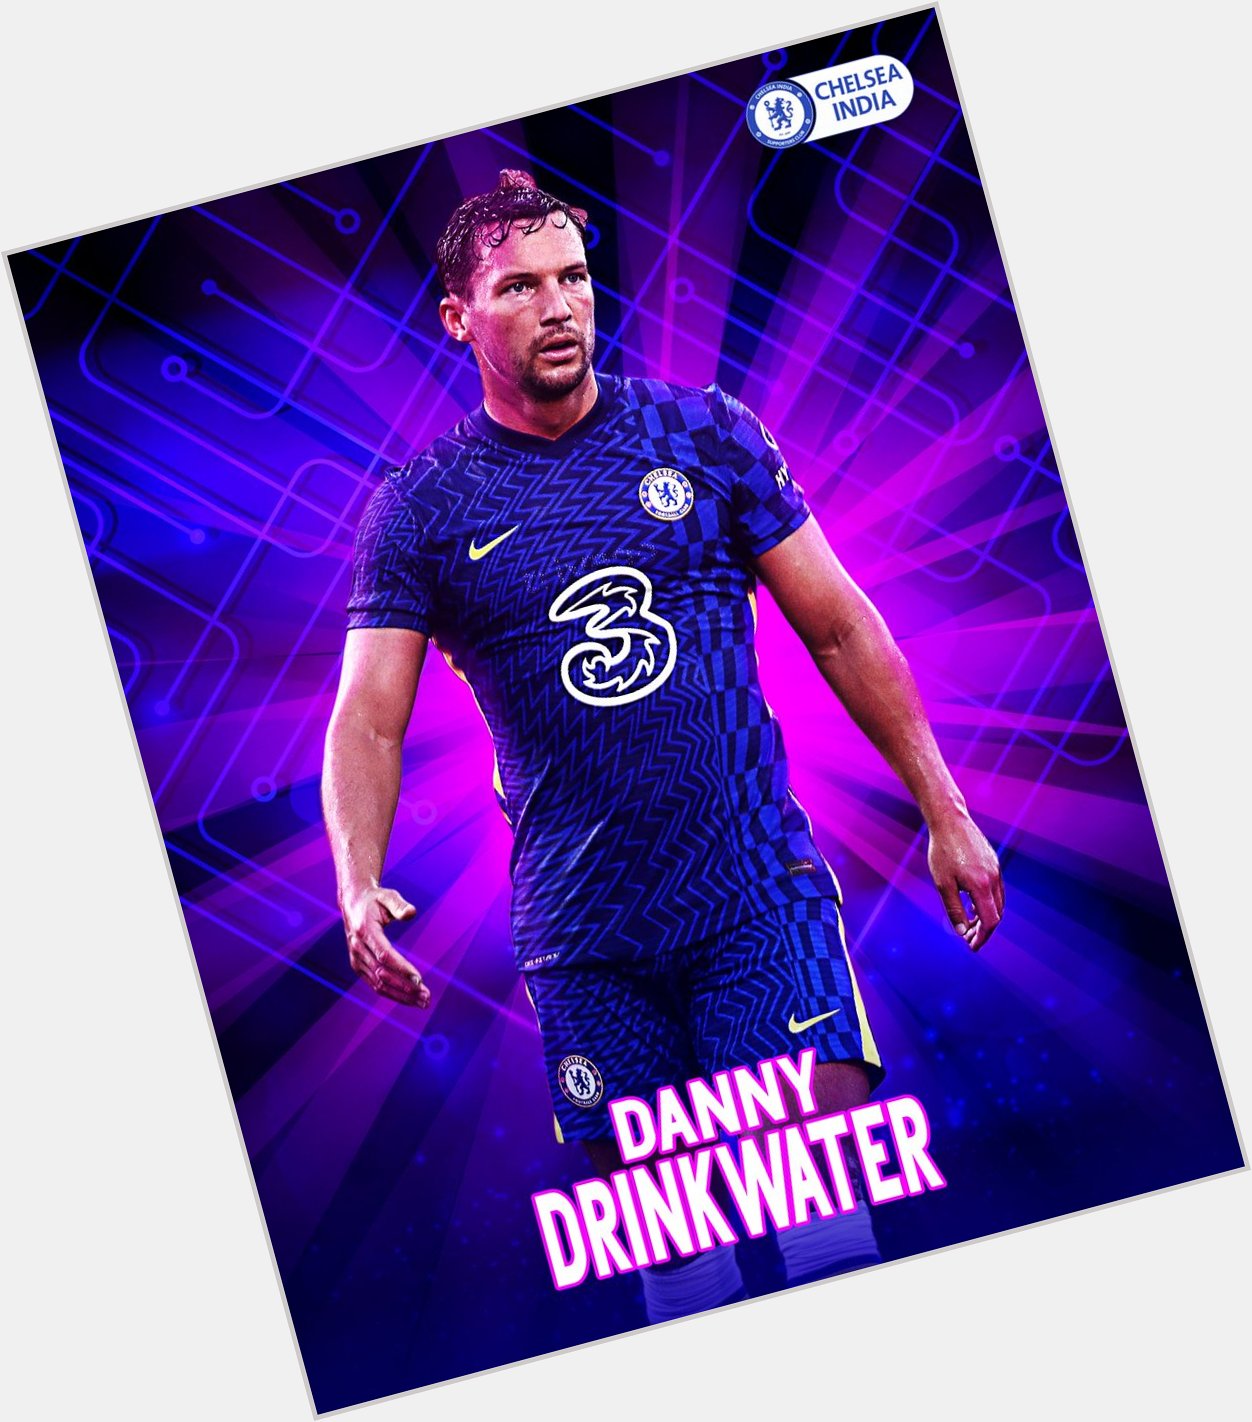 A very Happy Birthday to Danny Drinkwater who turns 32 today.

Have a great one Danny   